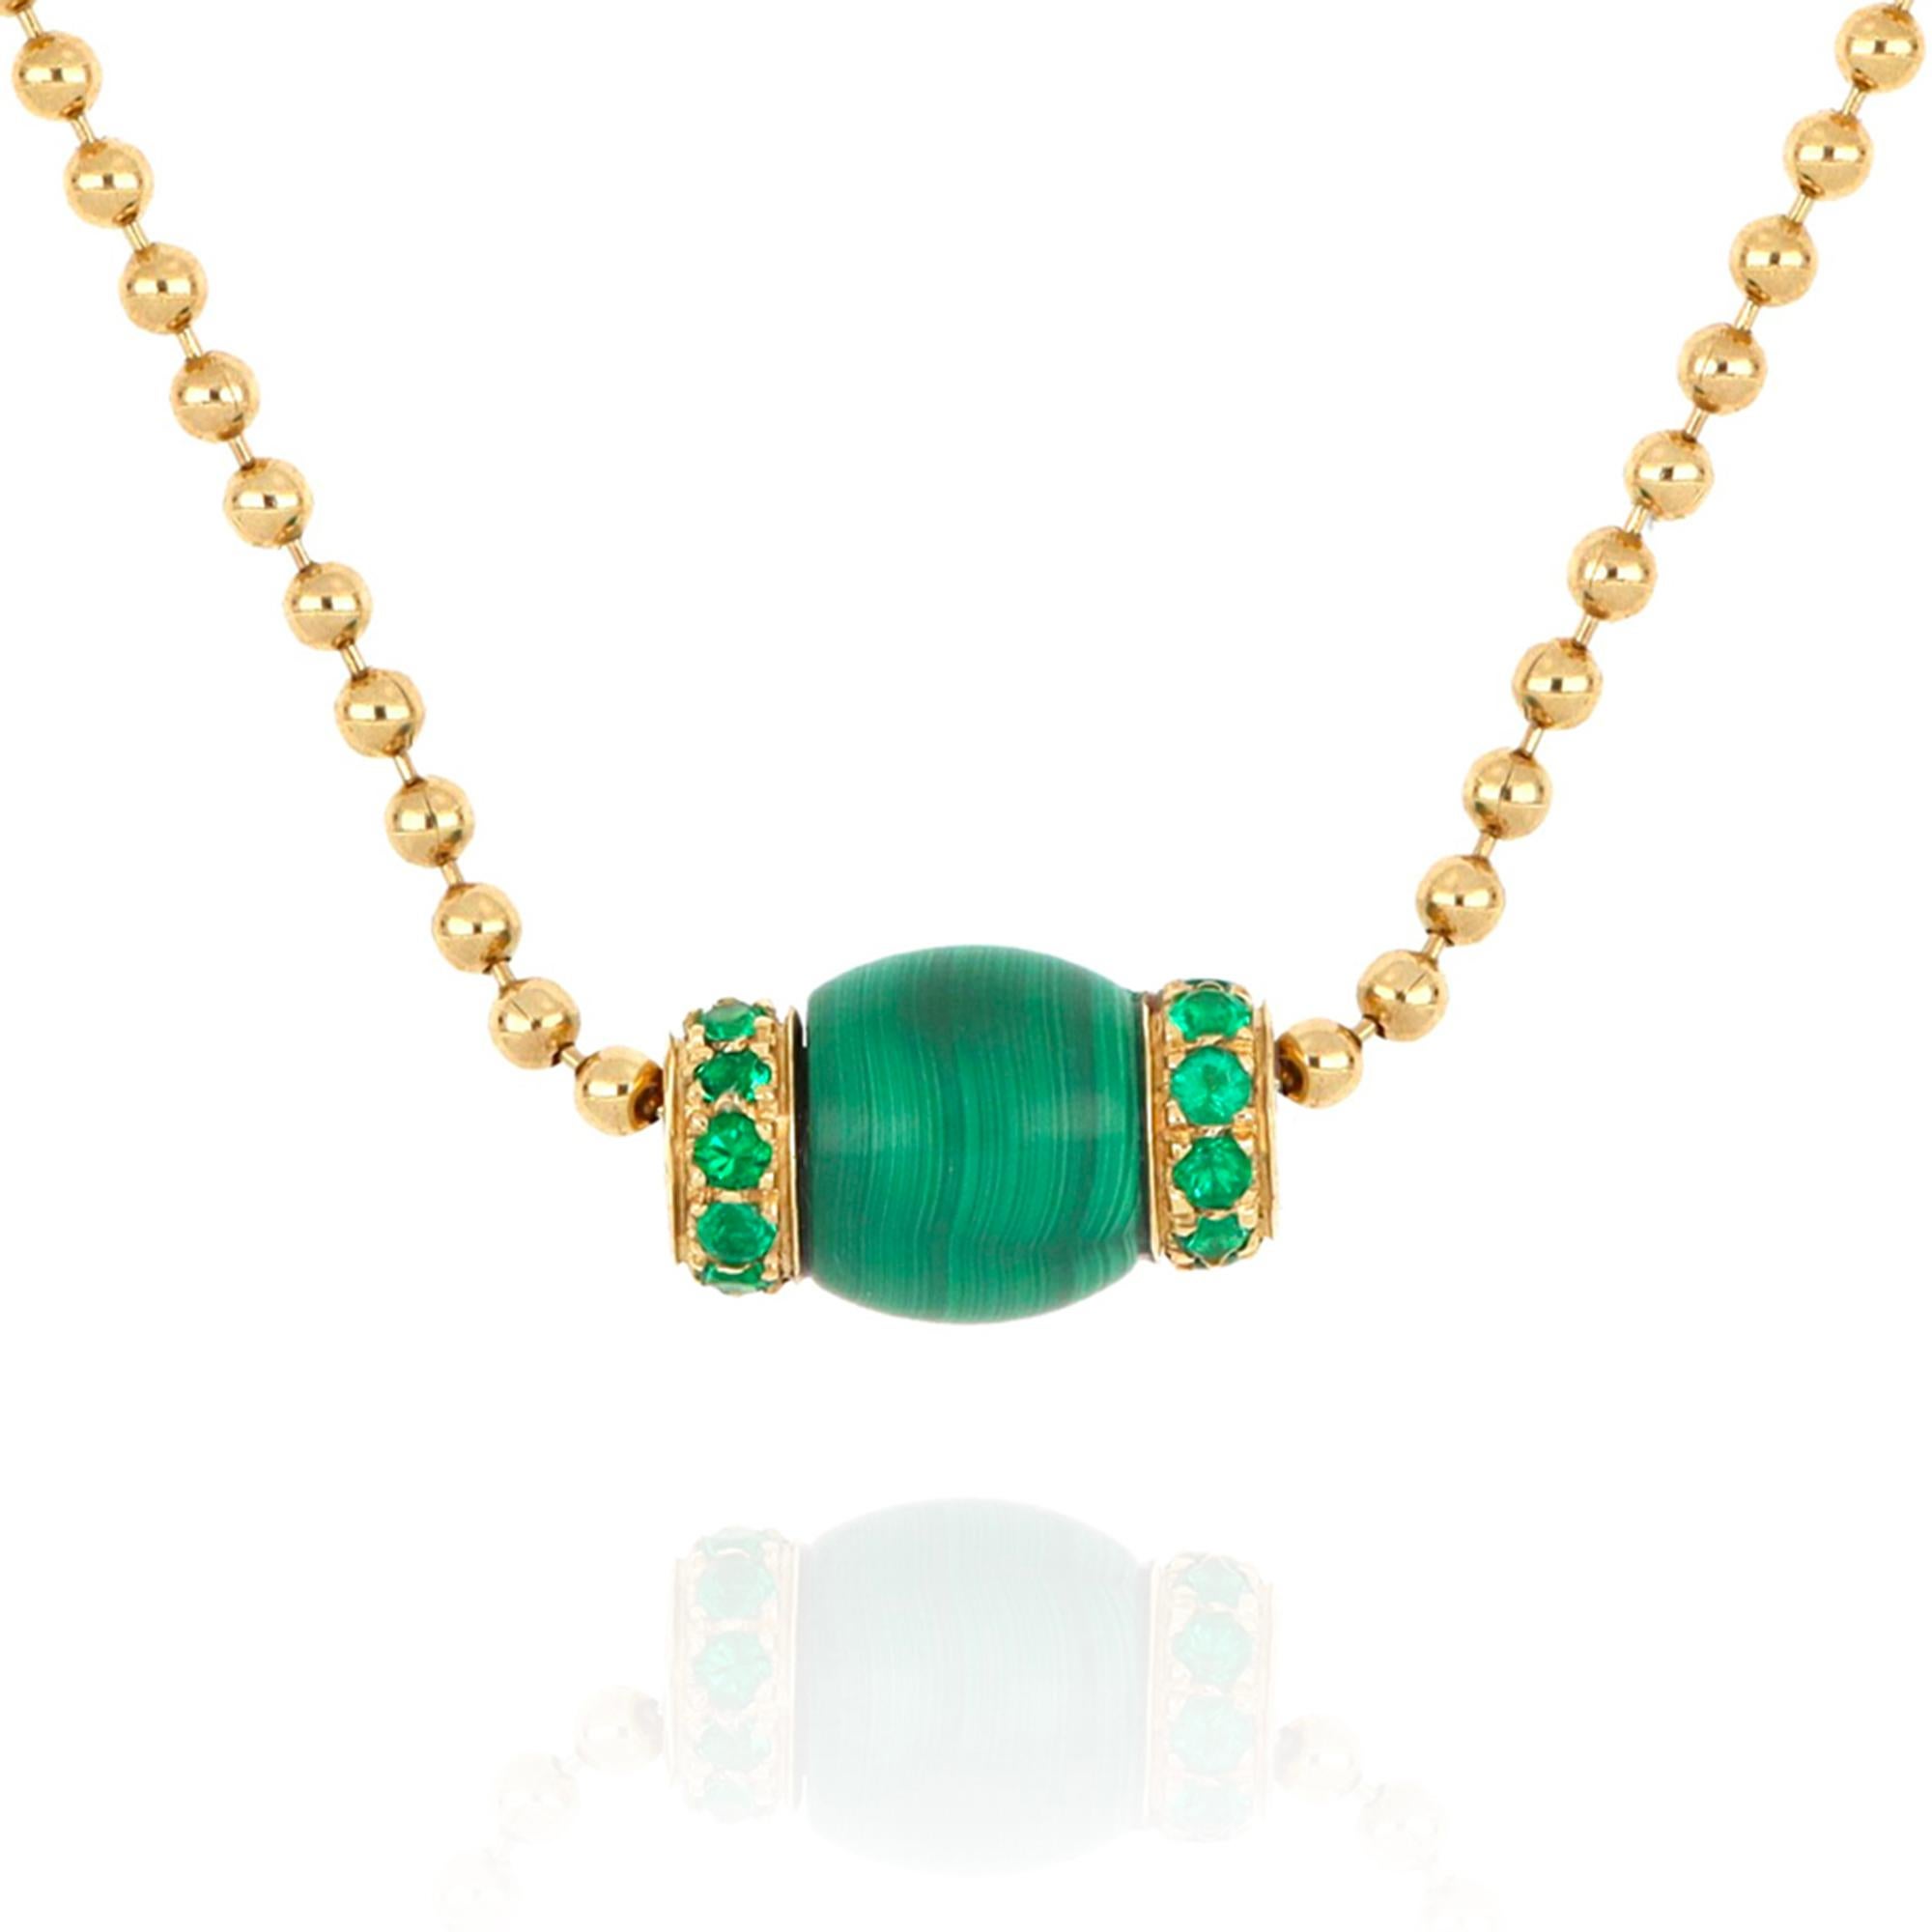 Avant-garde design, simple and linear volumes come together in this necklace from Le Carrousel collection. 18-karat yellow gold, combined with the deep green of malachite and the preciousness of emeralds, ennobles the three-dimensionality of the